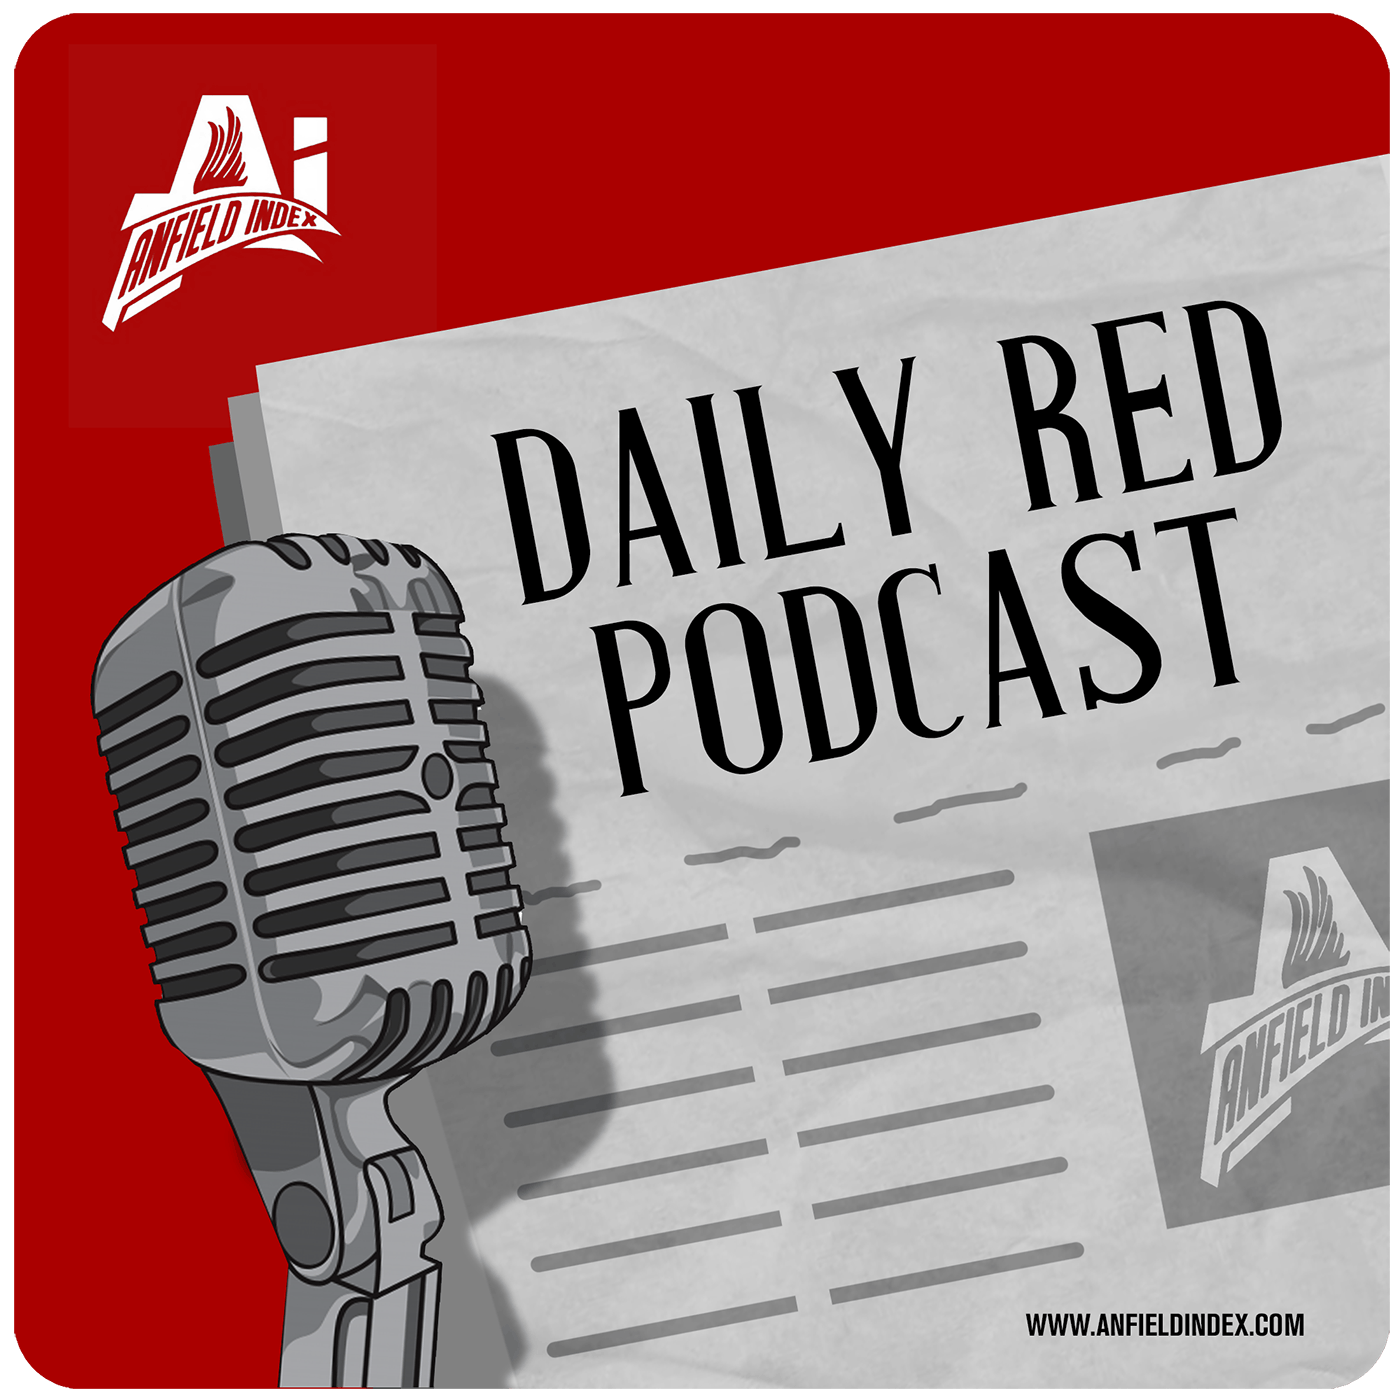 International Round-Up - Daily Red Podcast